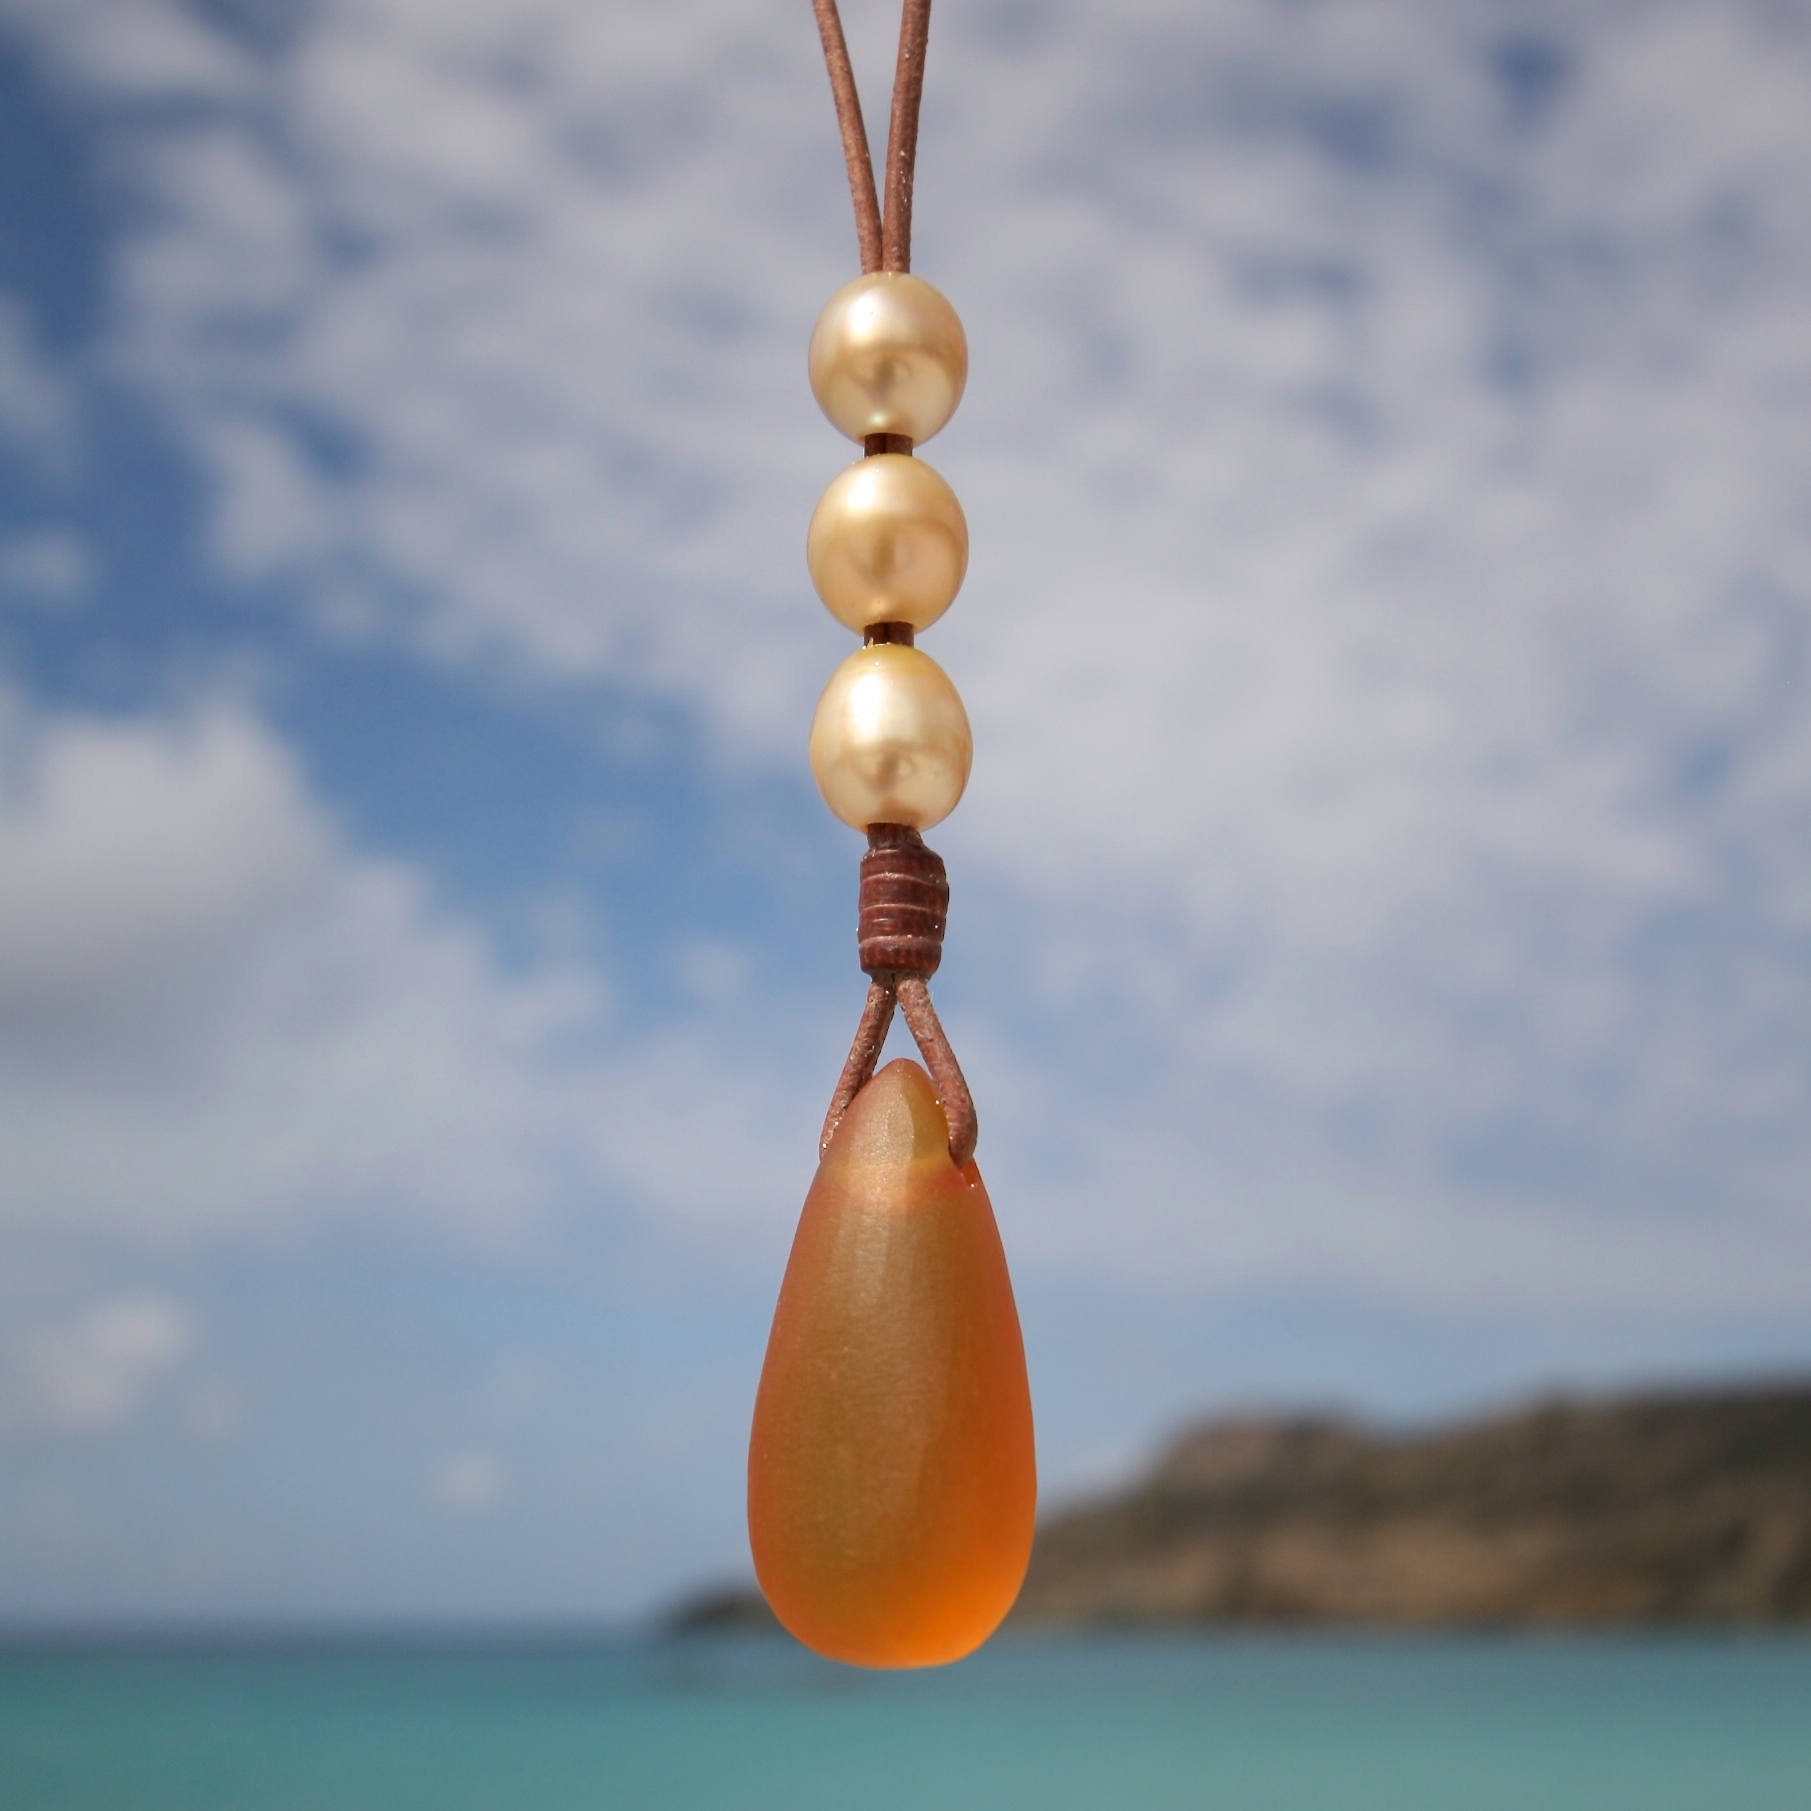 St barth jewelry pearls leather necklace